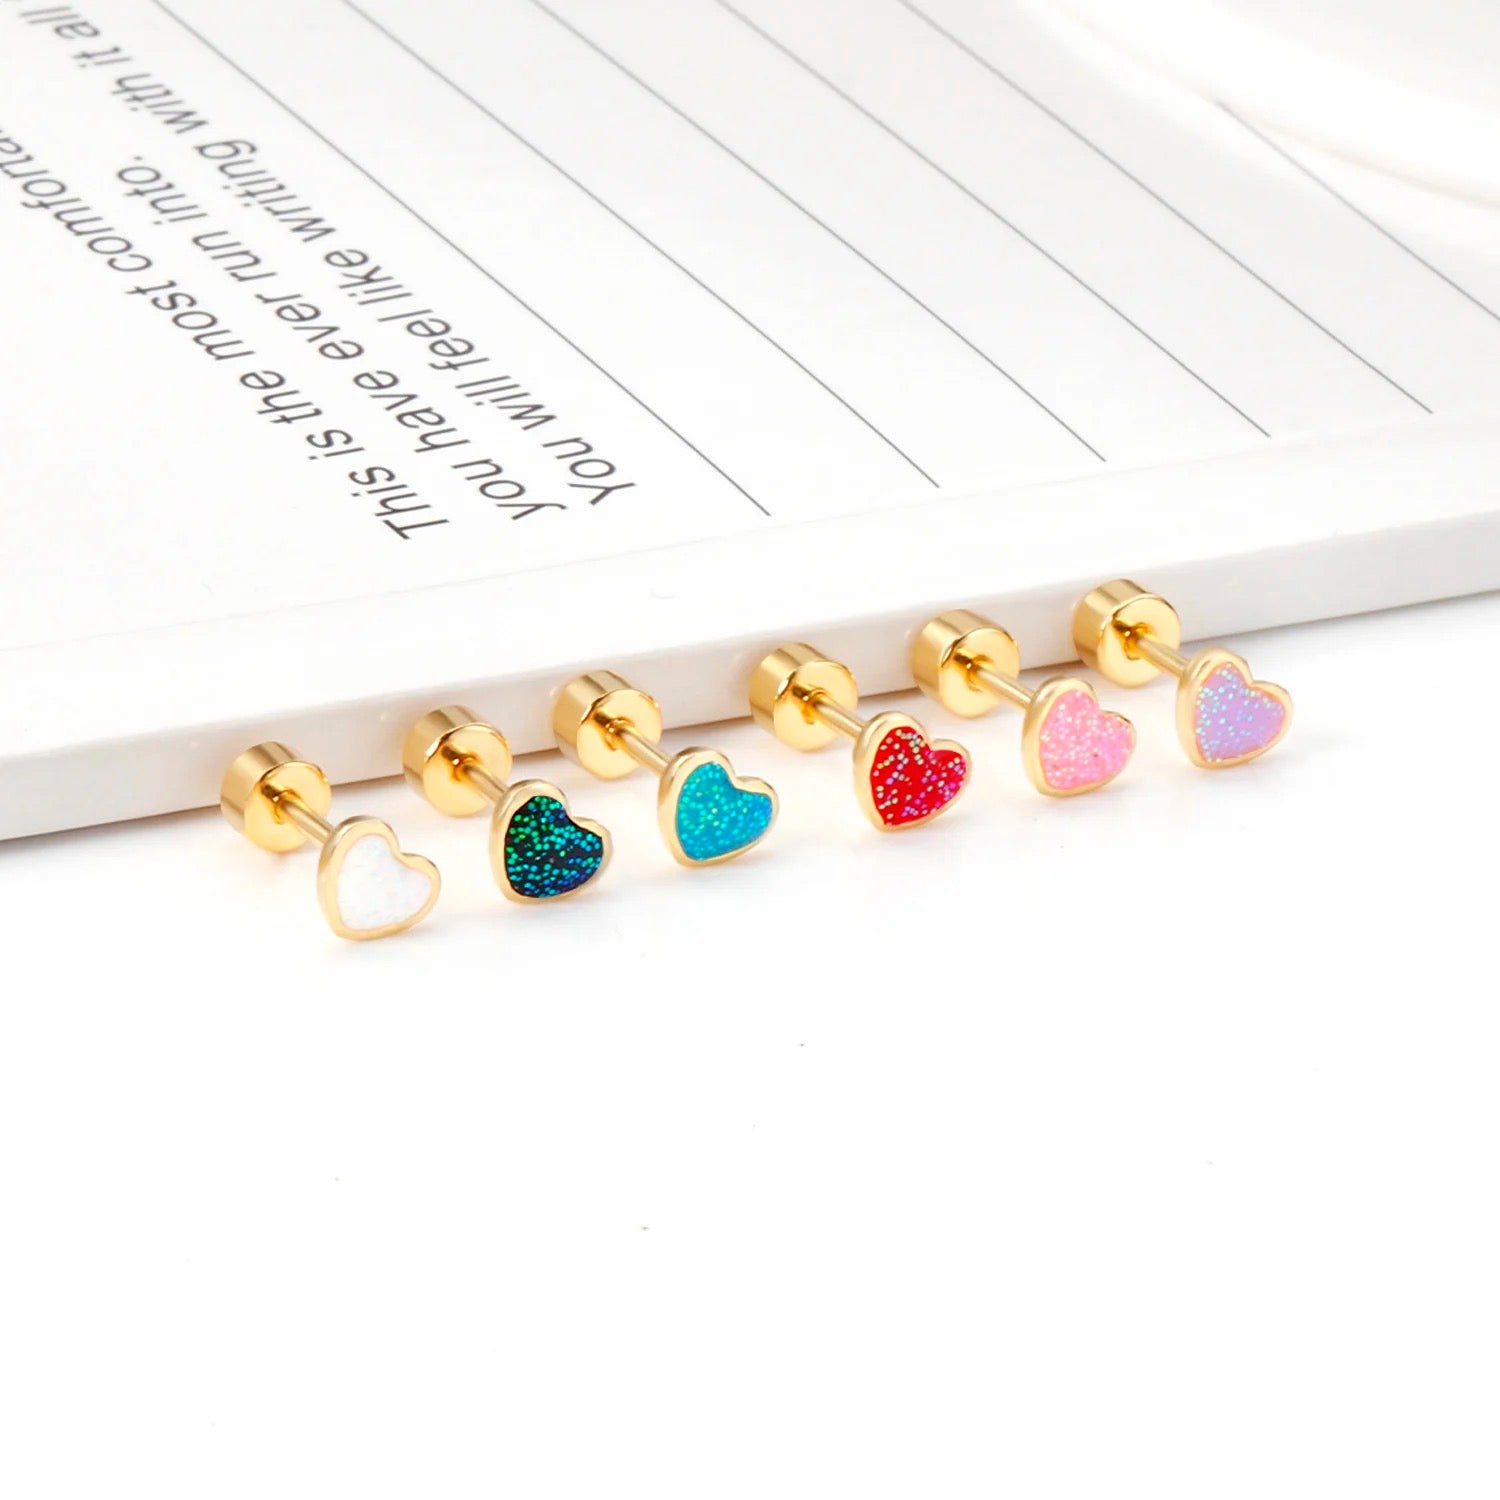 The Sweetheart 18KT Gold Stud - The Dangle Jewelry Collection